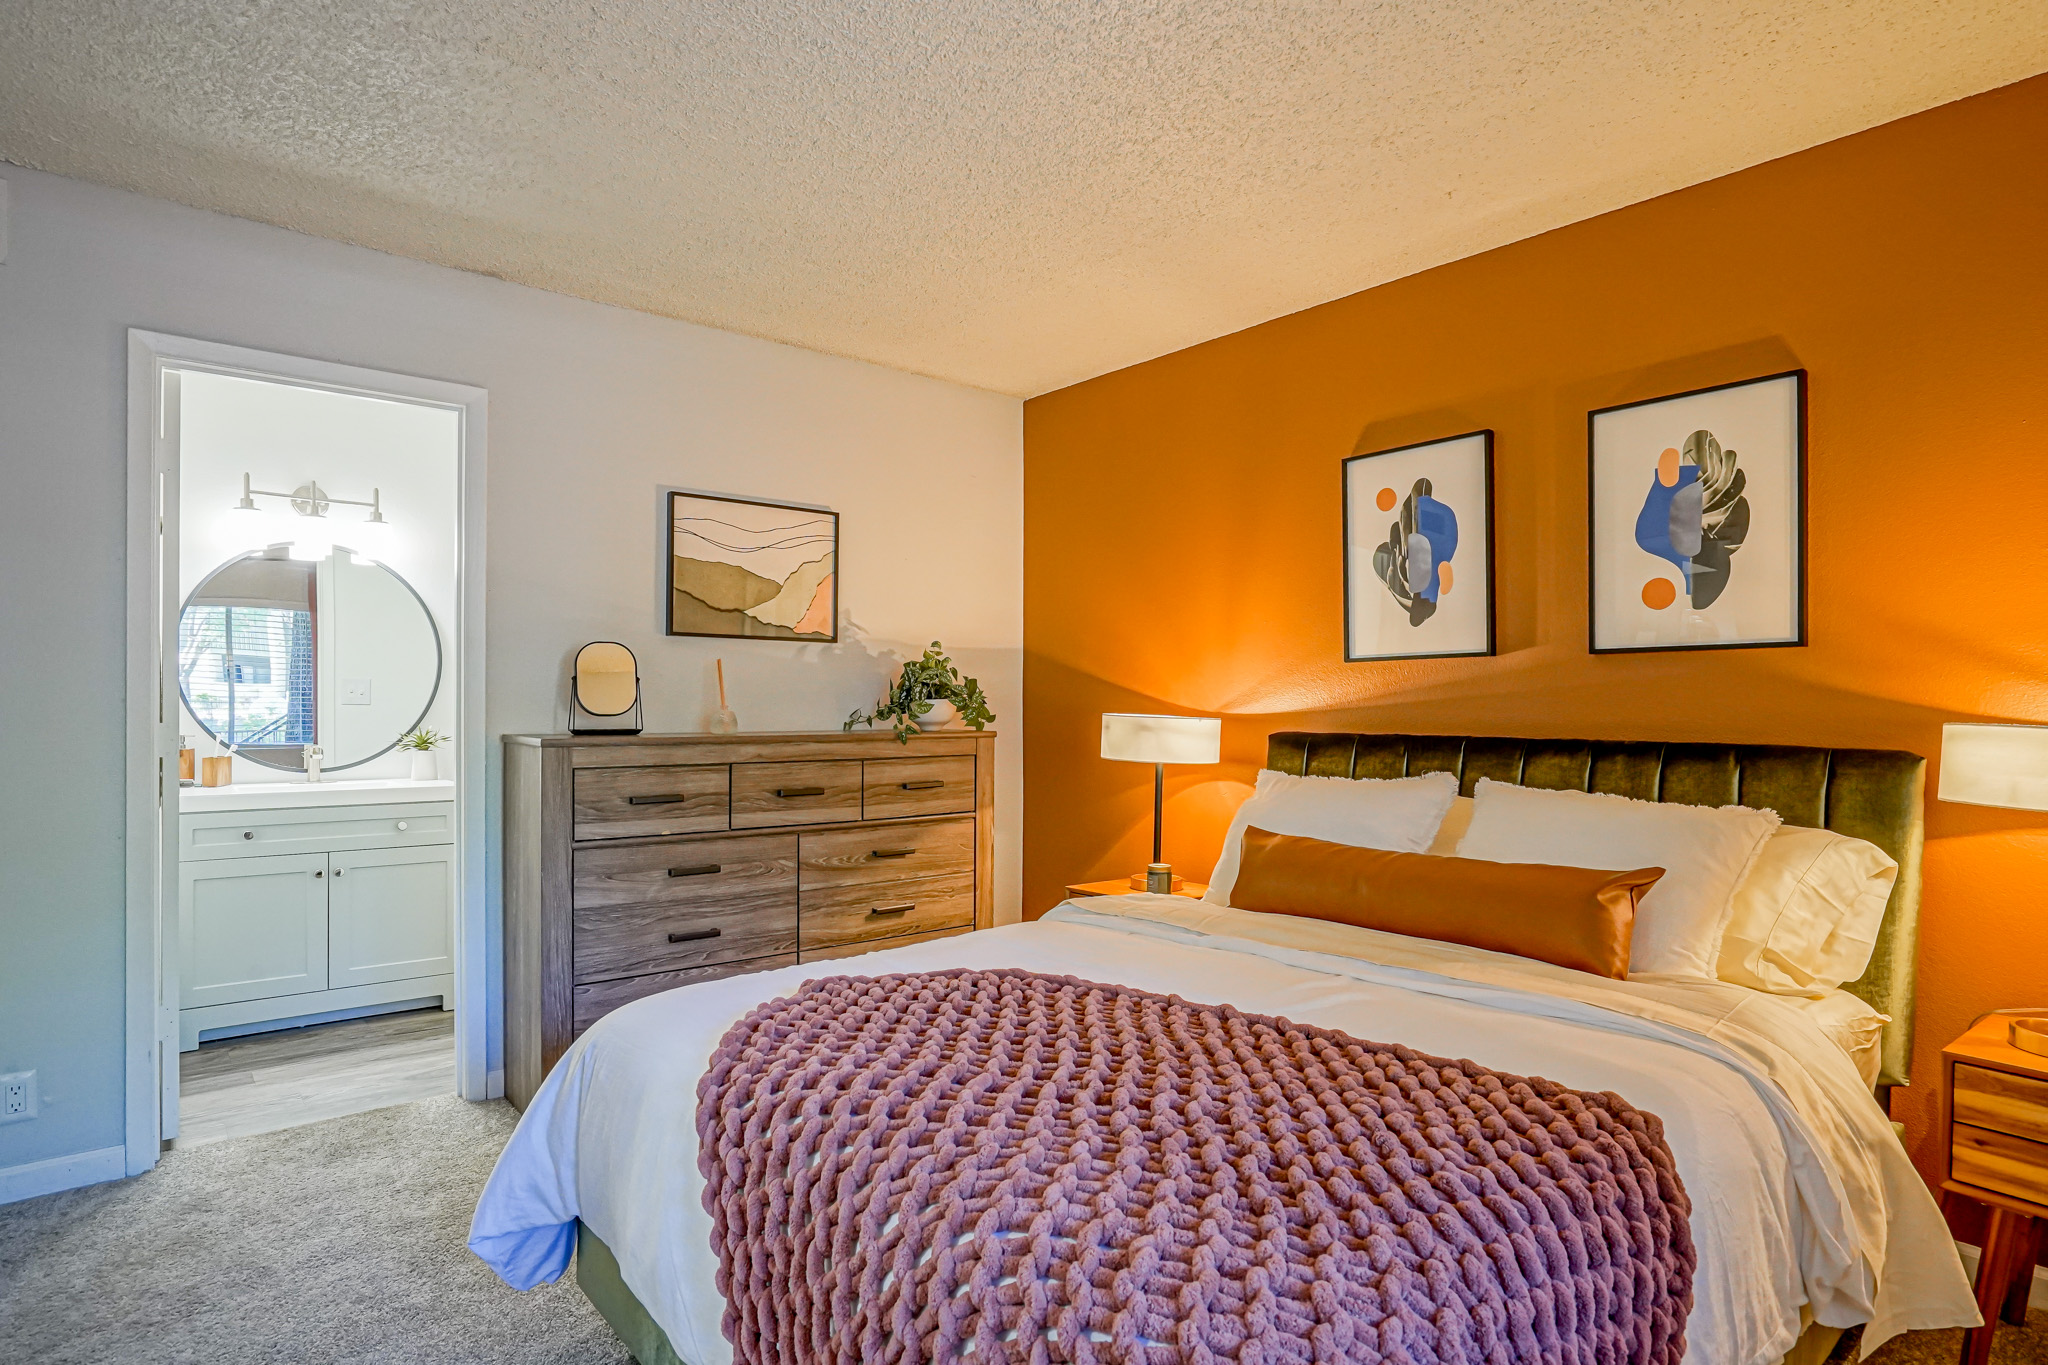 Furnished platinum bedroom interior at Treehouse in Albuquerque, New Mexico